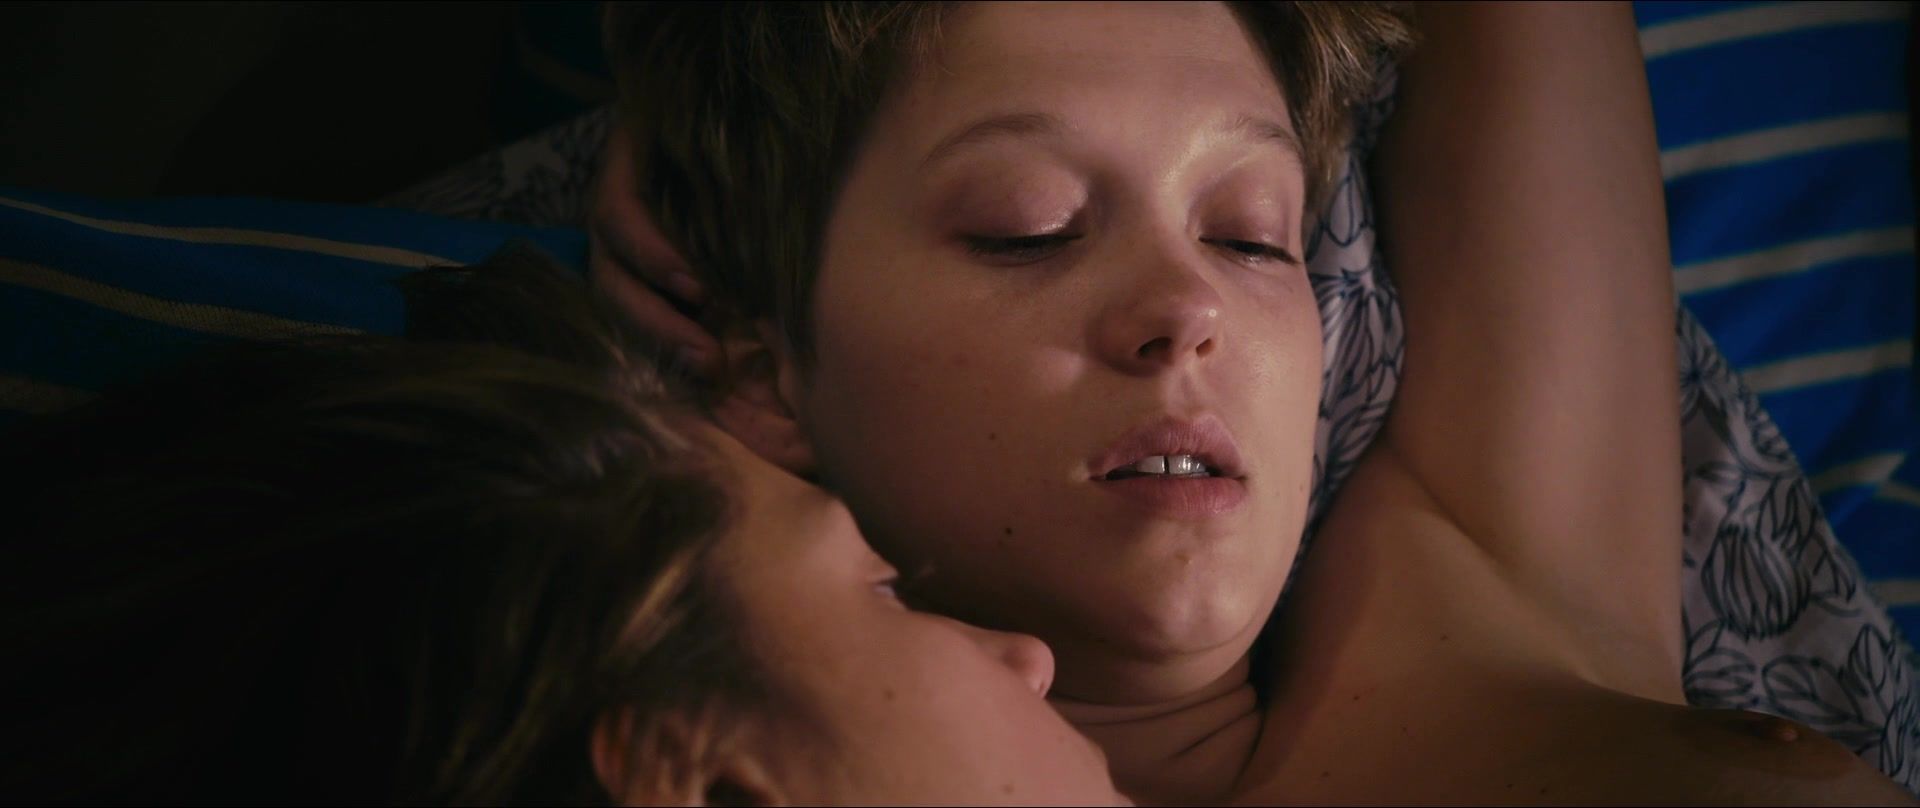 Twinkstudios Best lesbian scene in movies | Adele Exarchopoulos nude & Léa Seydoux naked | The film "Blue Is The Warmest Color" (2013) 18 Year Old Porn